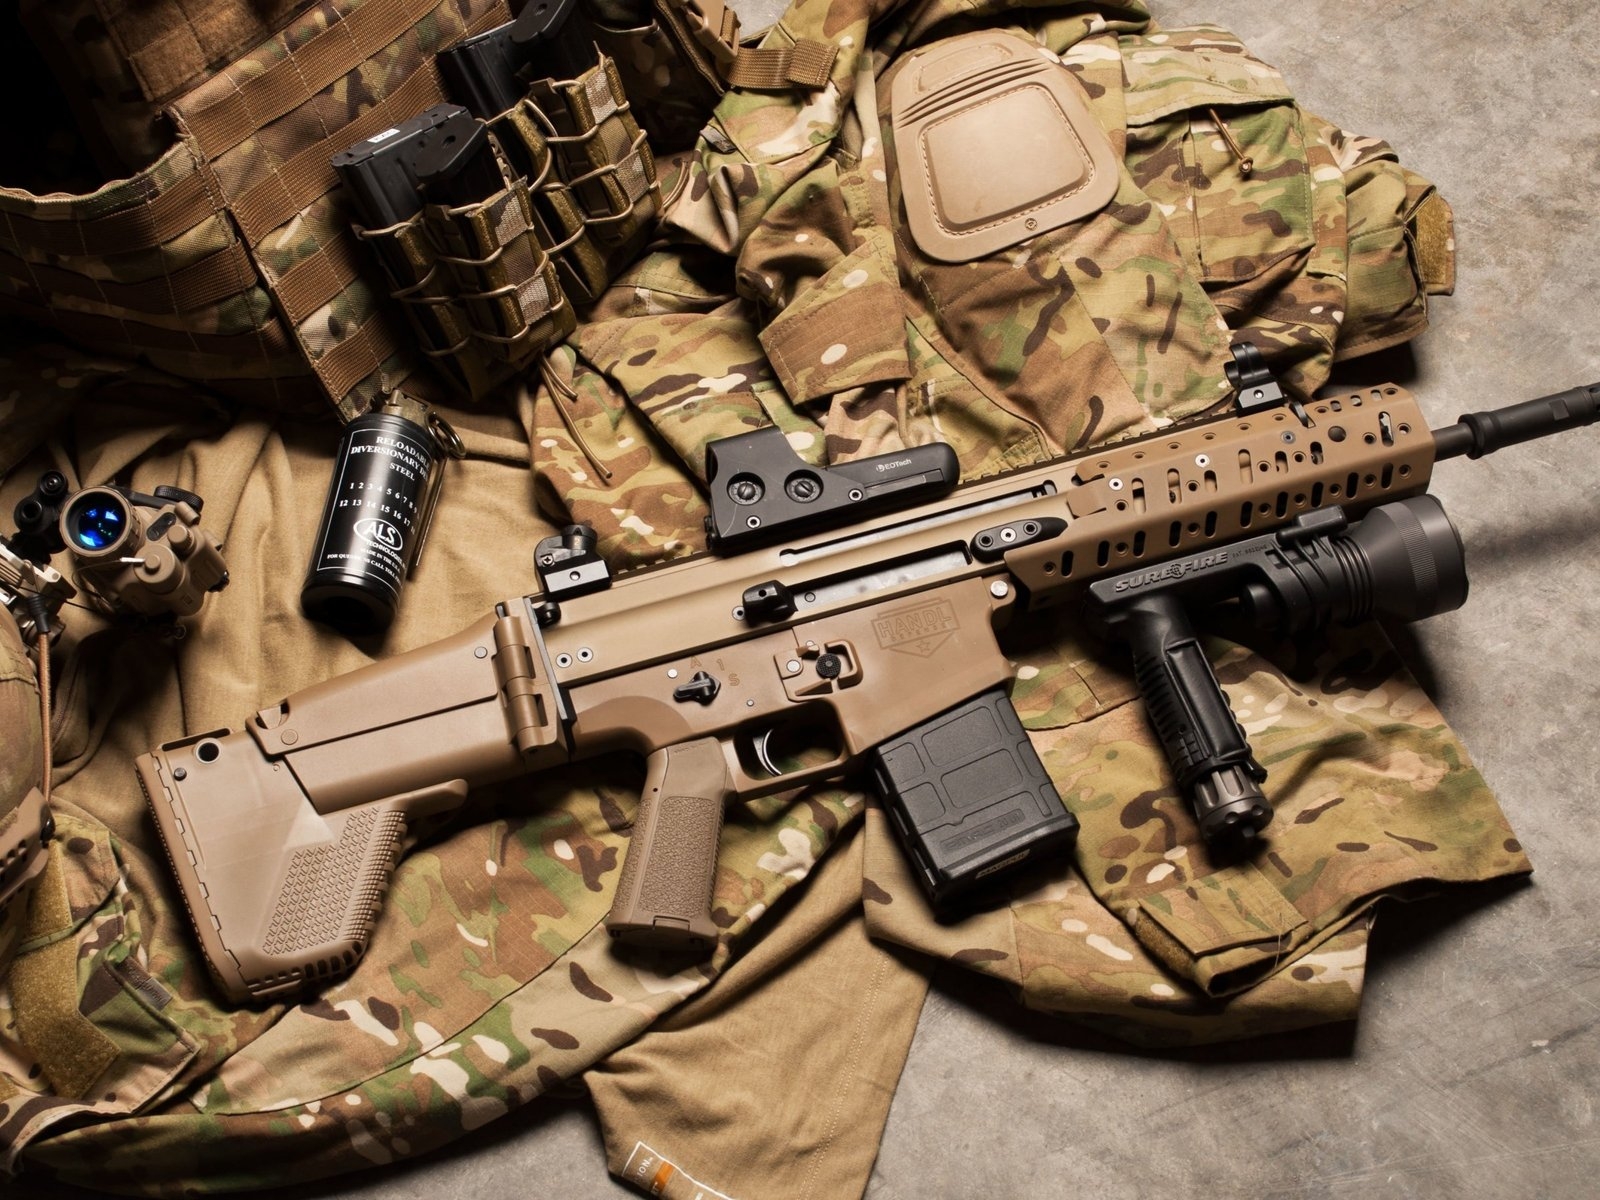 FN Scar Assault Rifle for 1600 x 1200 resolution